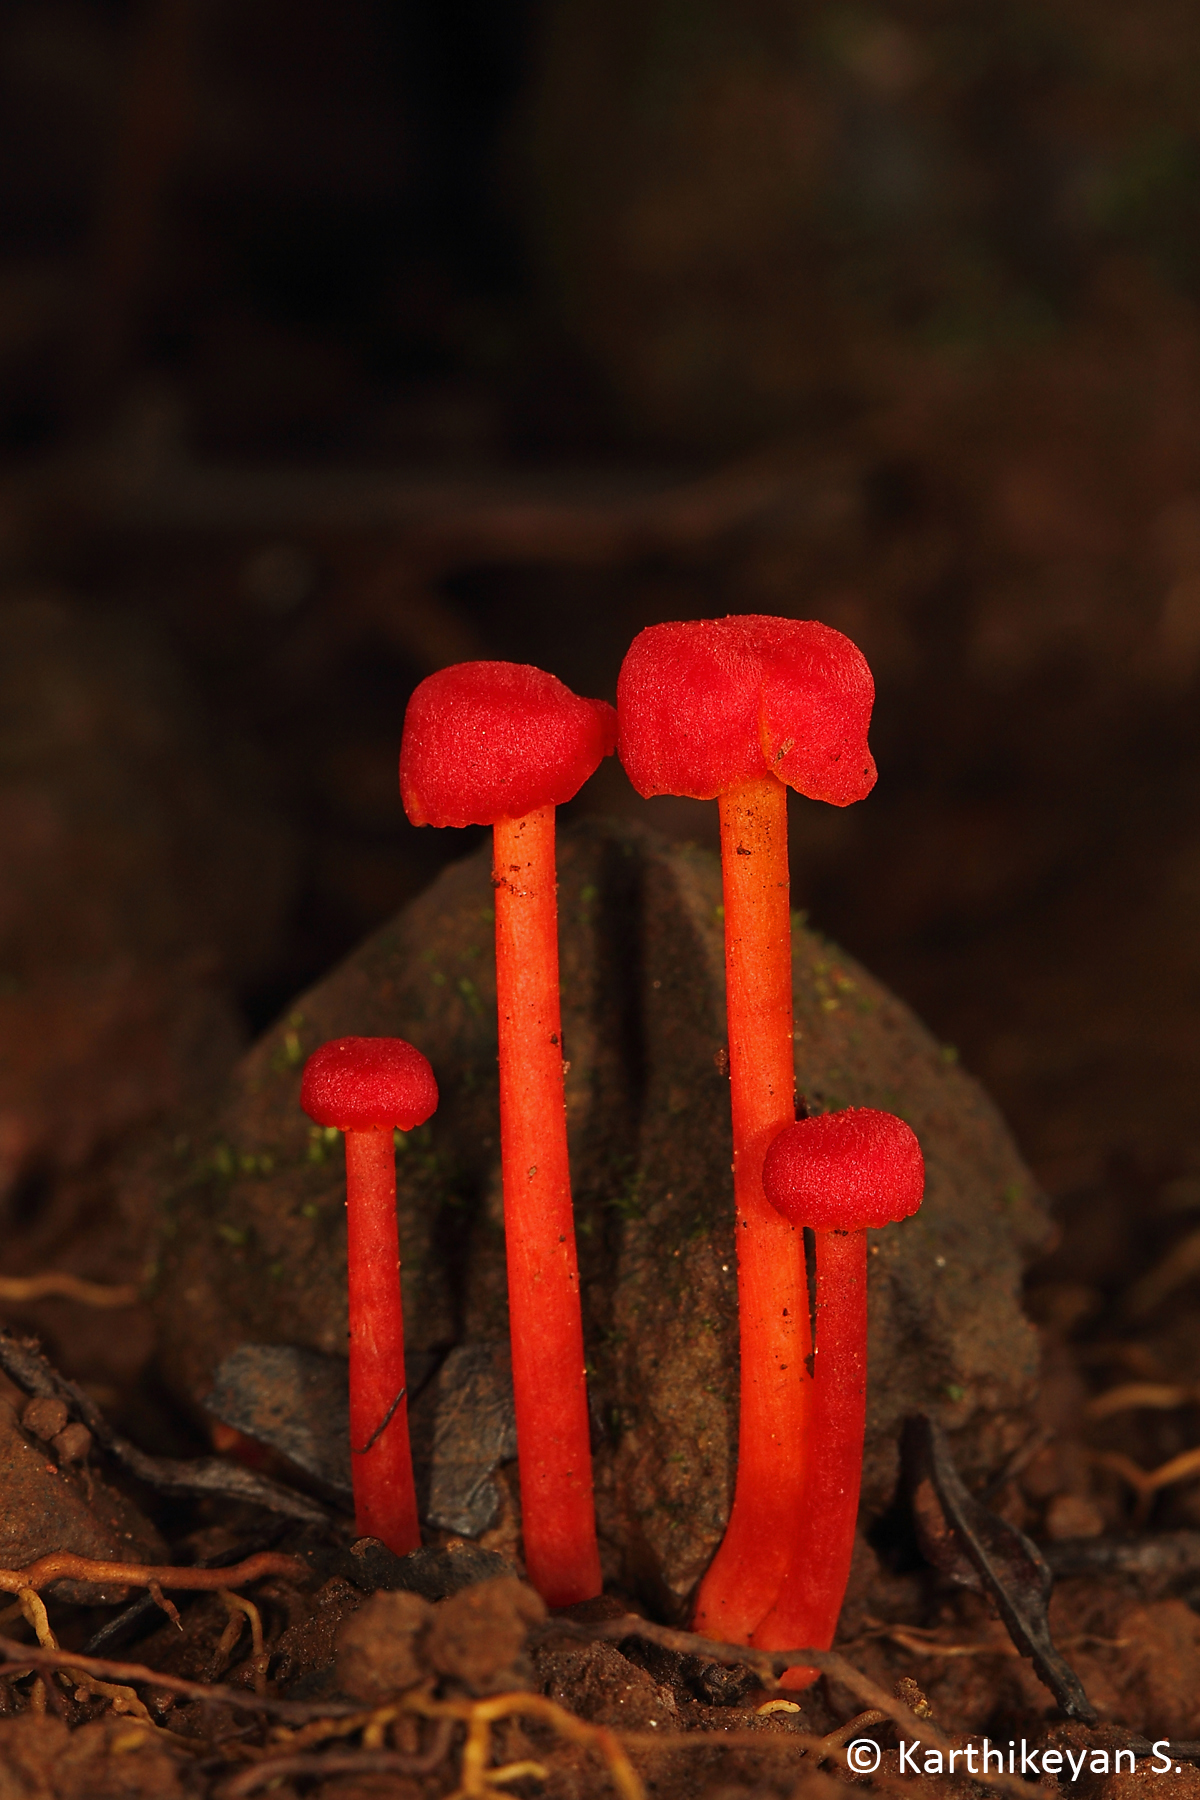 Lovely red fungi that grows on the forest floor in heavy rainfall areas - Hygrocybe sp.